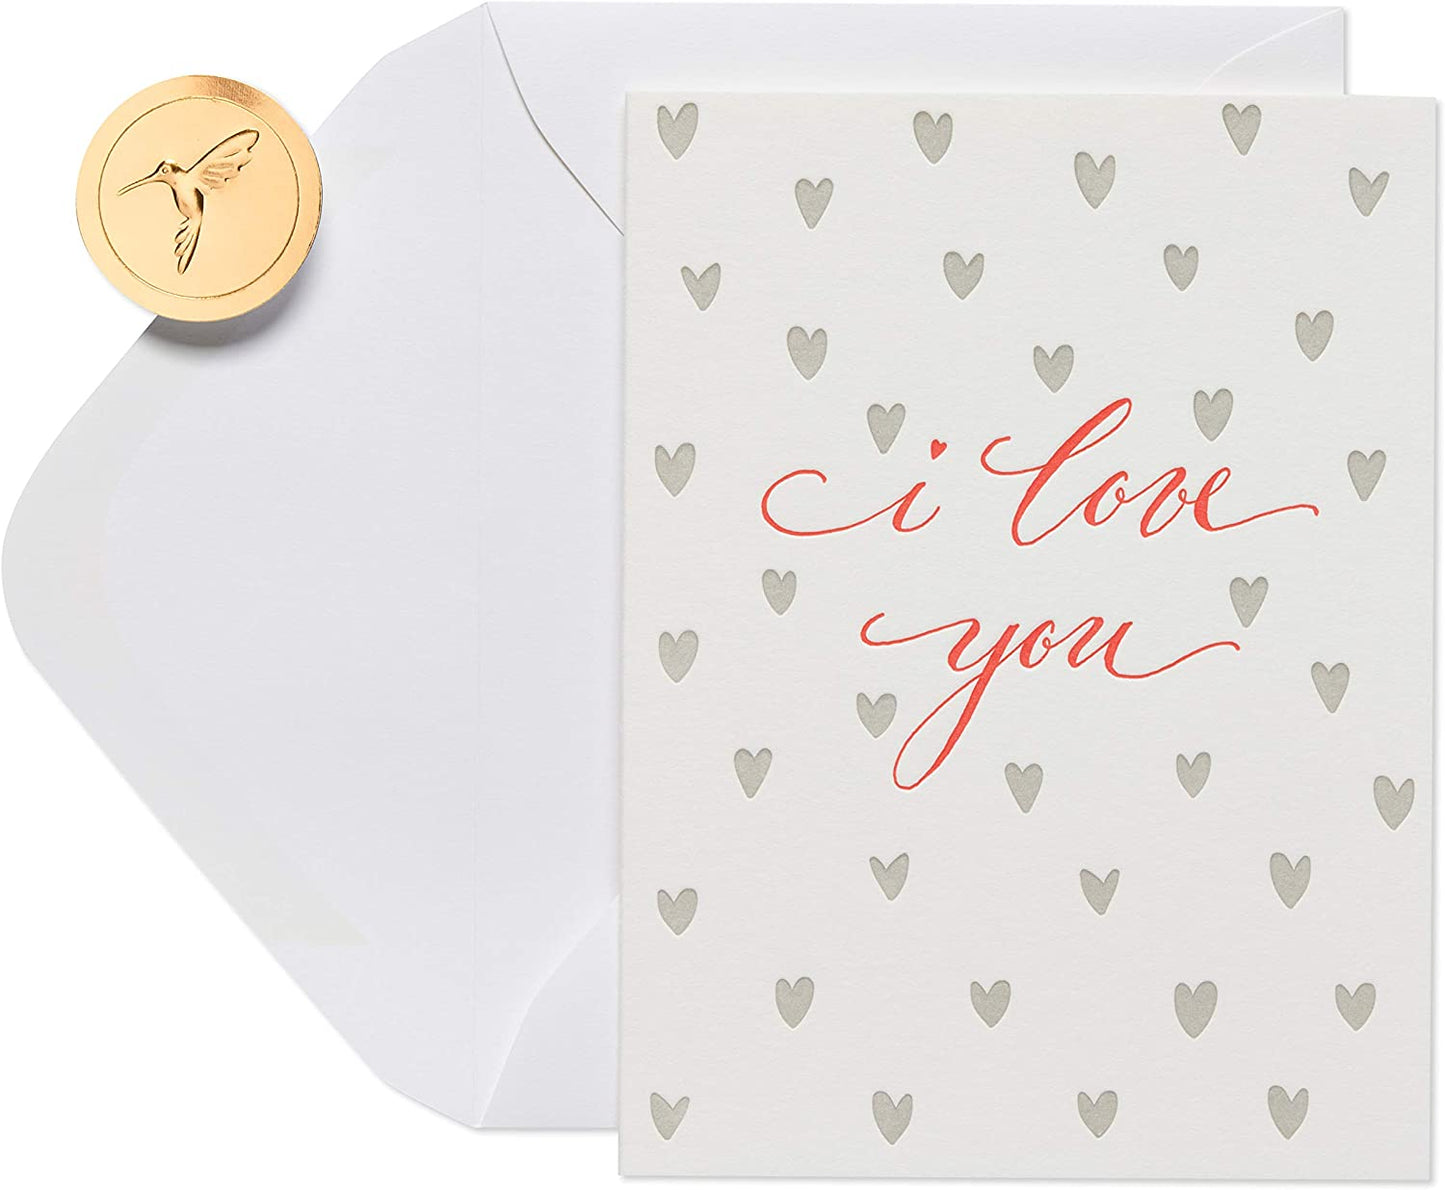 Papyrus Blank Romantic Card for Valentine's Day, Husband, Wife, Boyfriend, Girlfriend or Significant Other (I Love You)